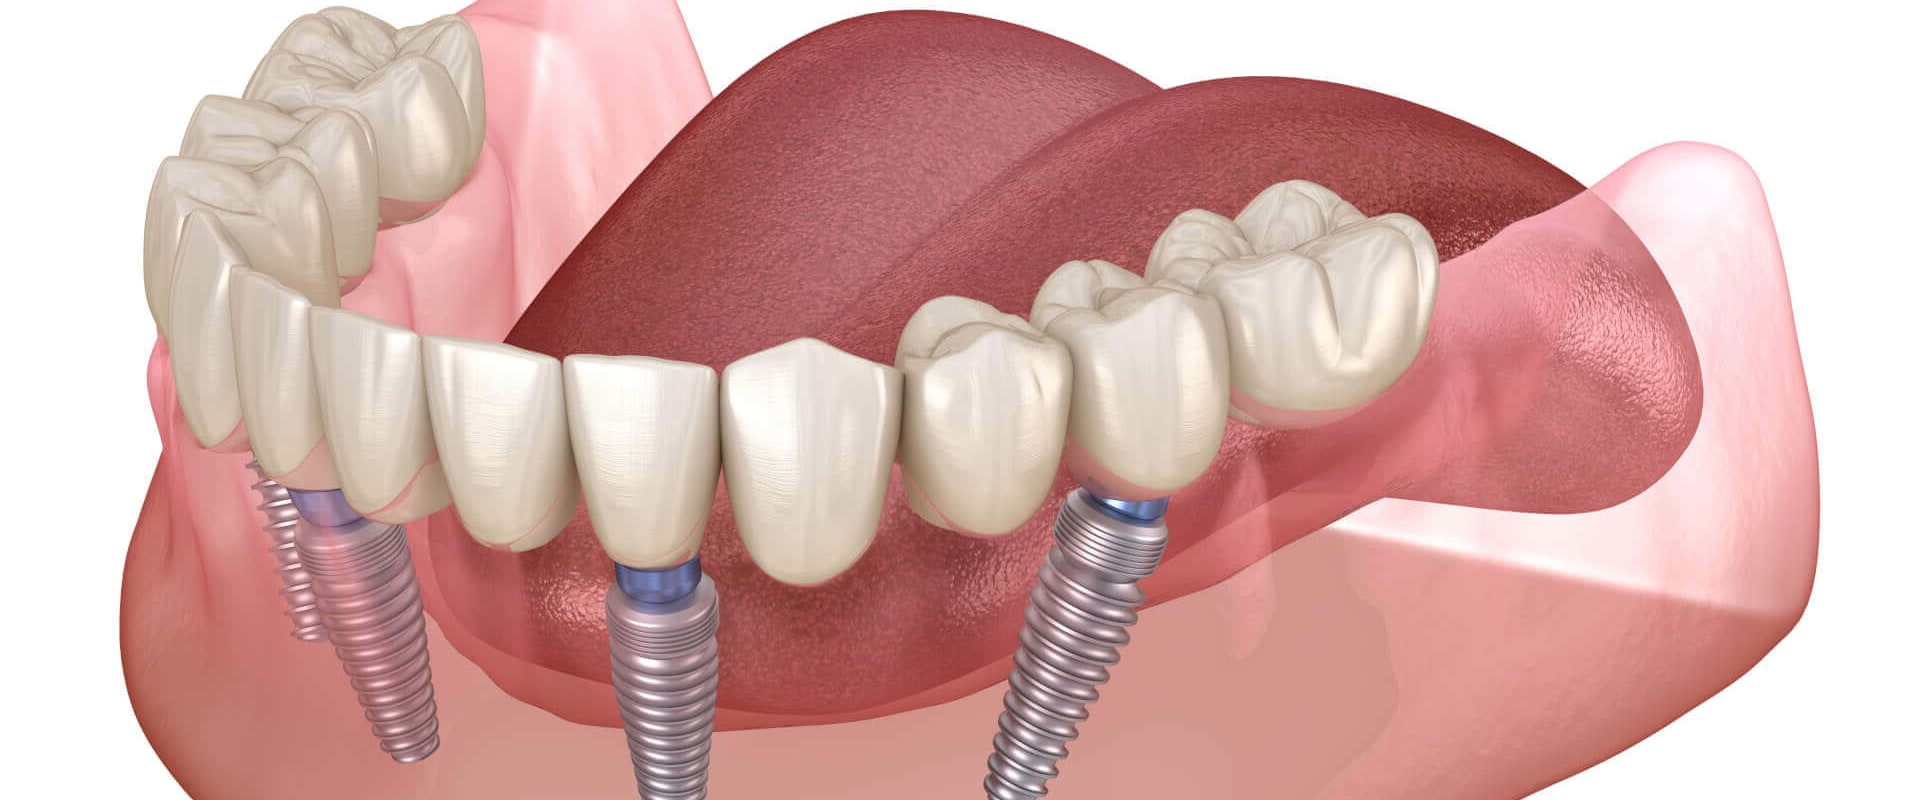 Improved Appearance and Self-Esteem: The Benefits of Dental Implants